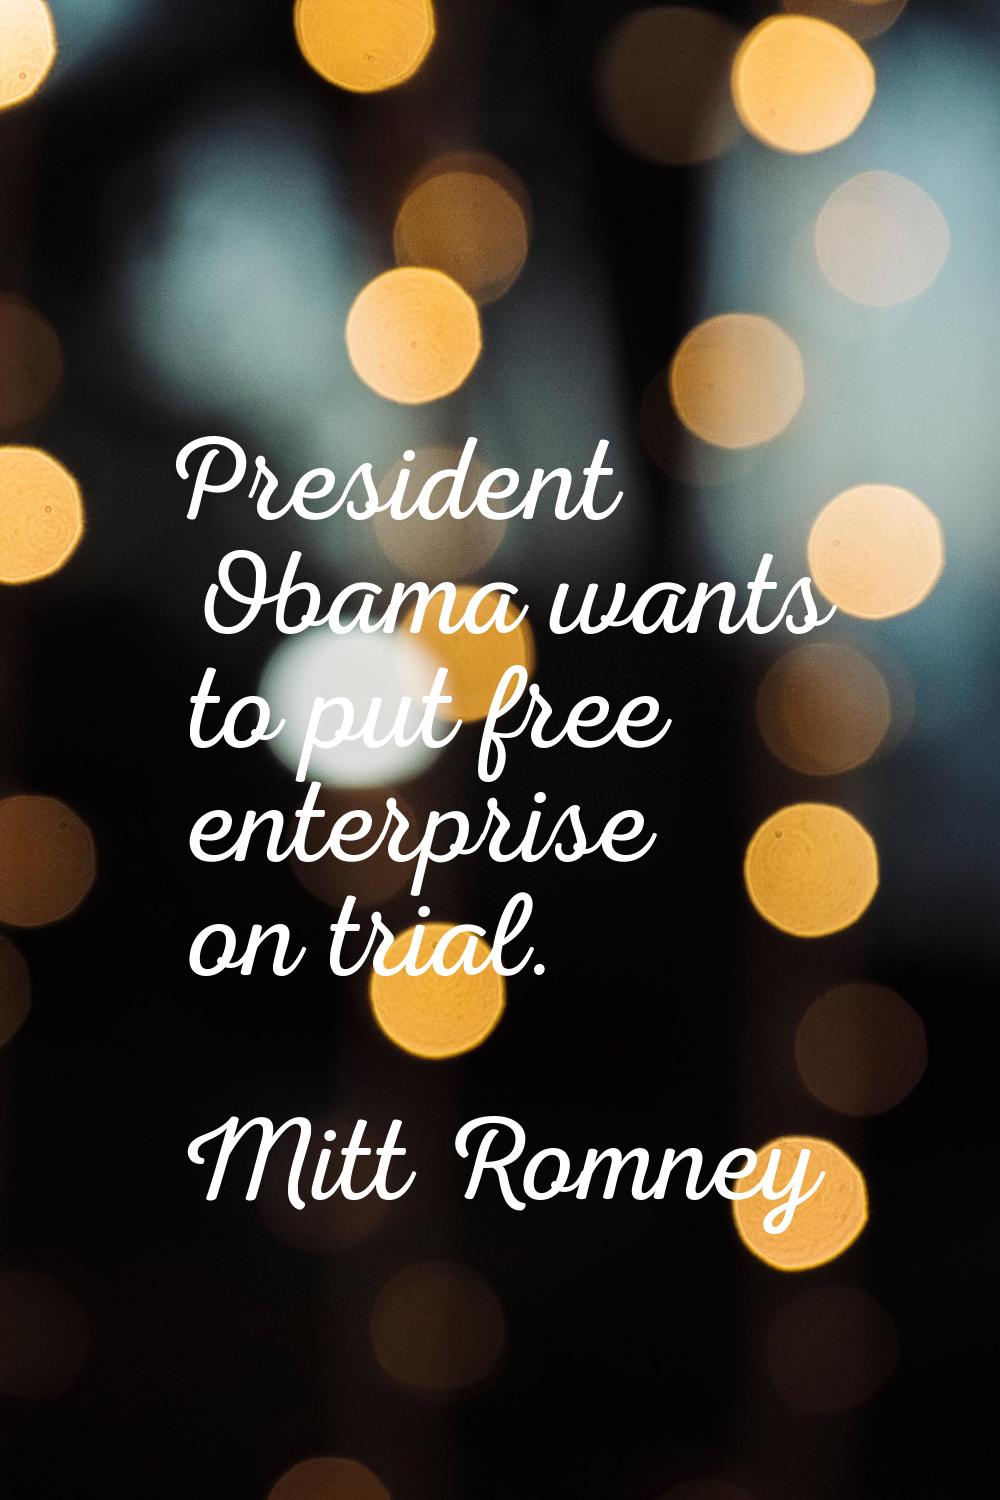 President Obama wants to put free enterprise on trial.